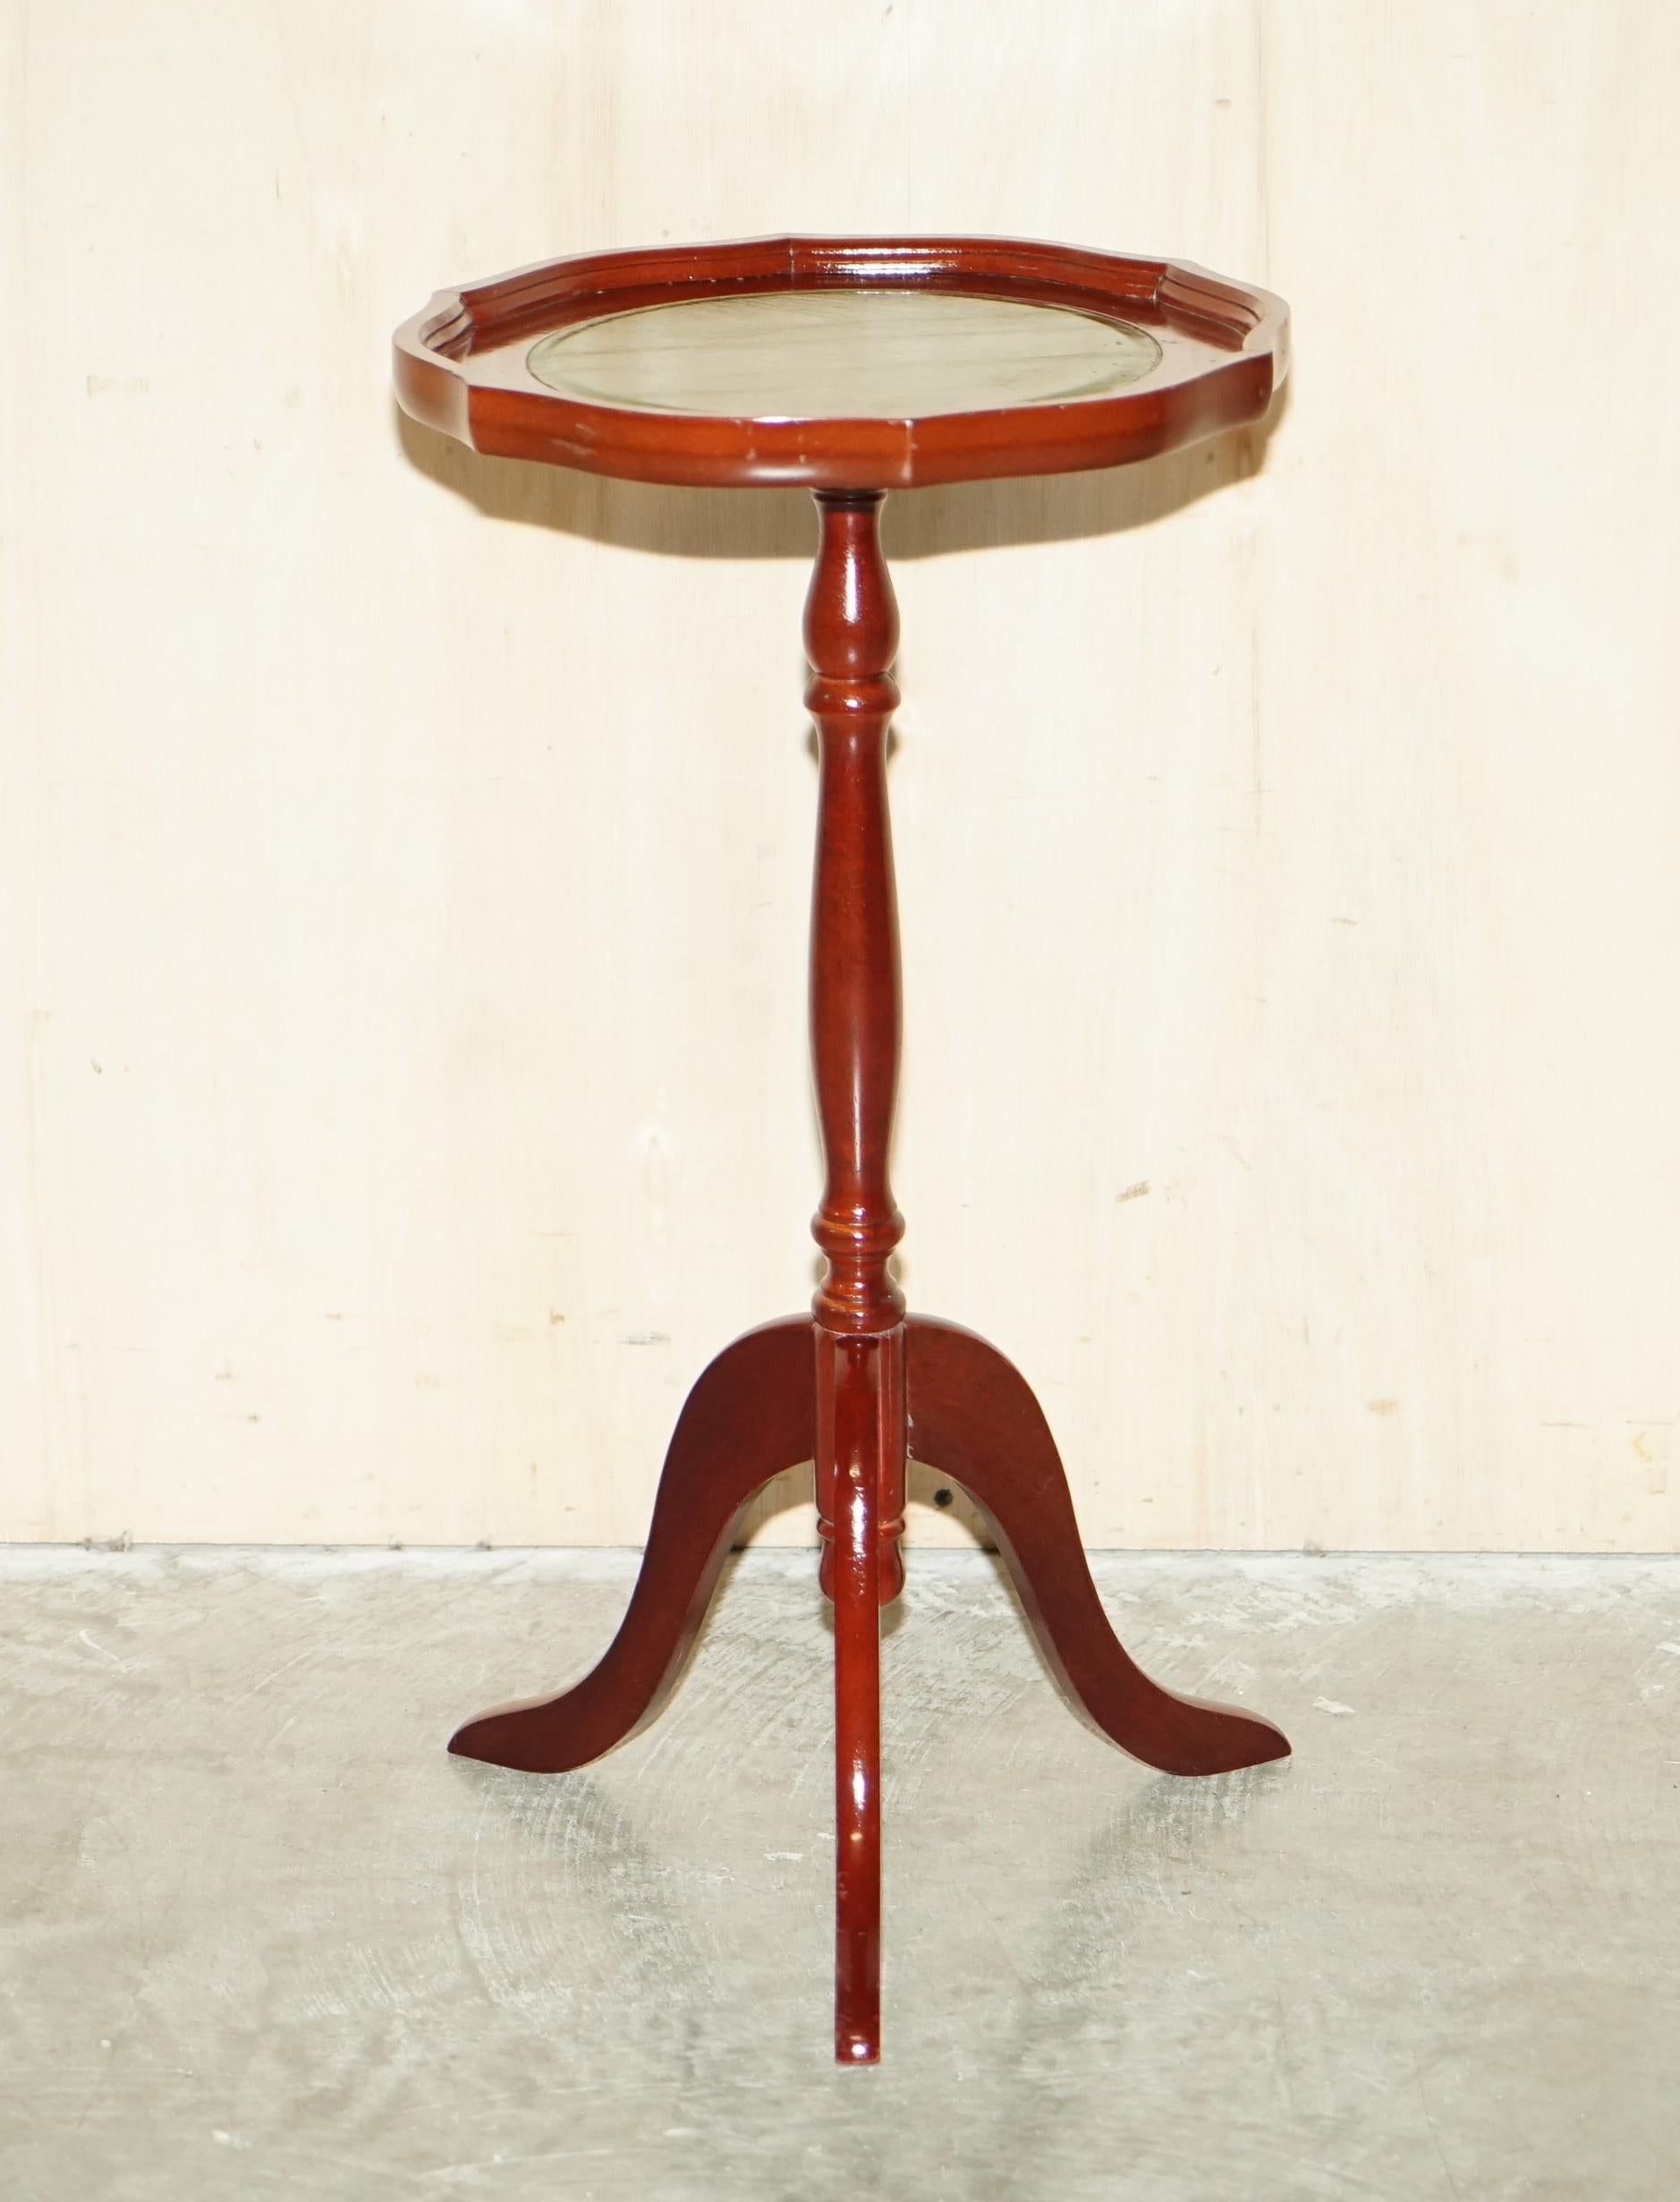 We are delighted to offer for sale this very nice vintage Bevan Funnell beech & green leather topped tripod table

A good looking and well made piece, ideally suited for a lamp or glass of wine with a picture frame on it

It has been cleaned